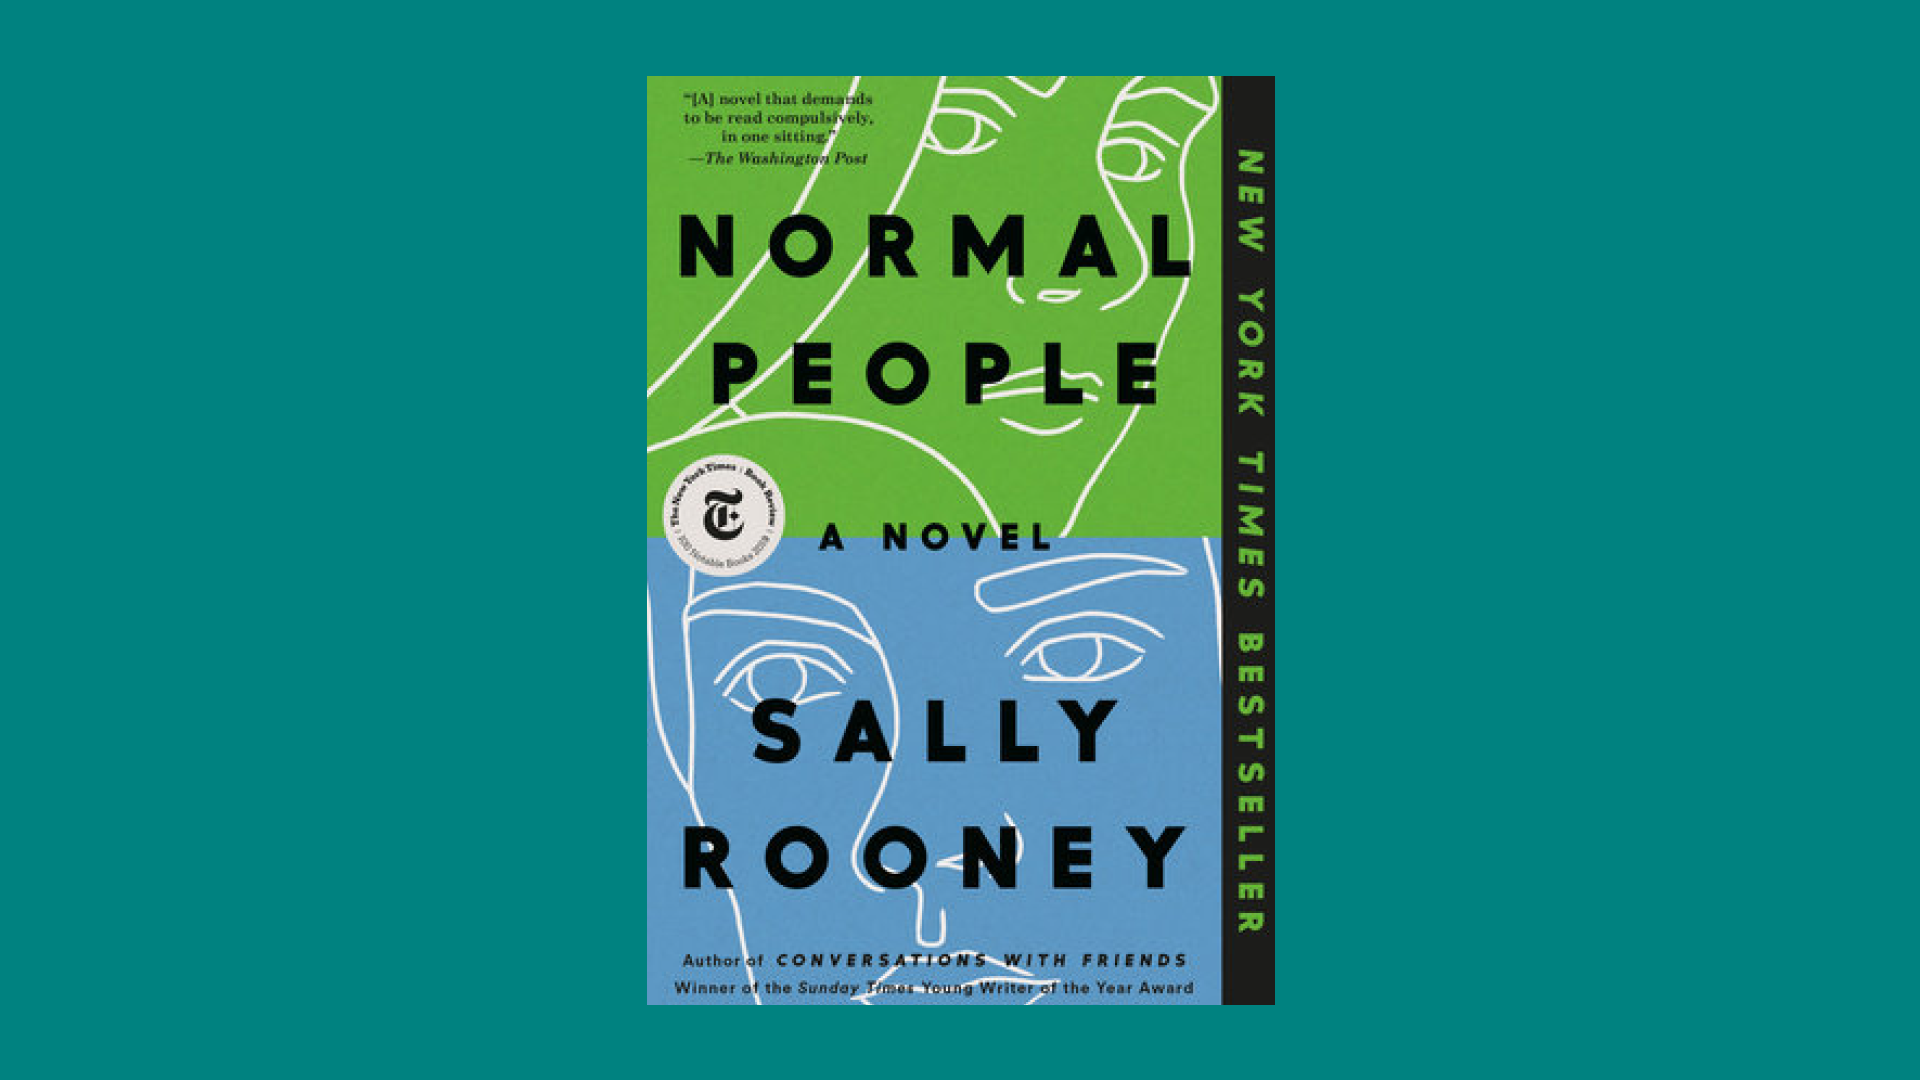 "Normal People" by Sally Rooney 